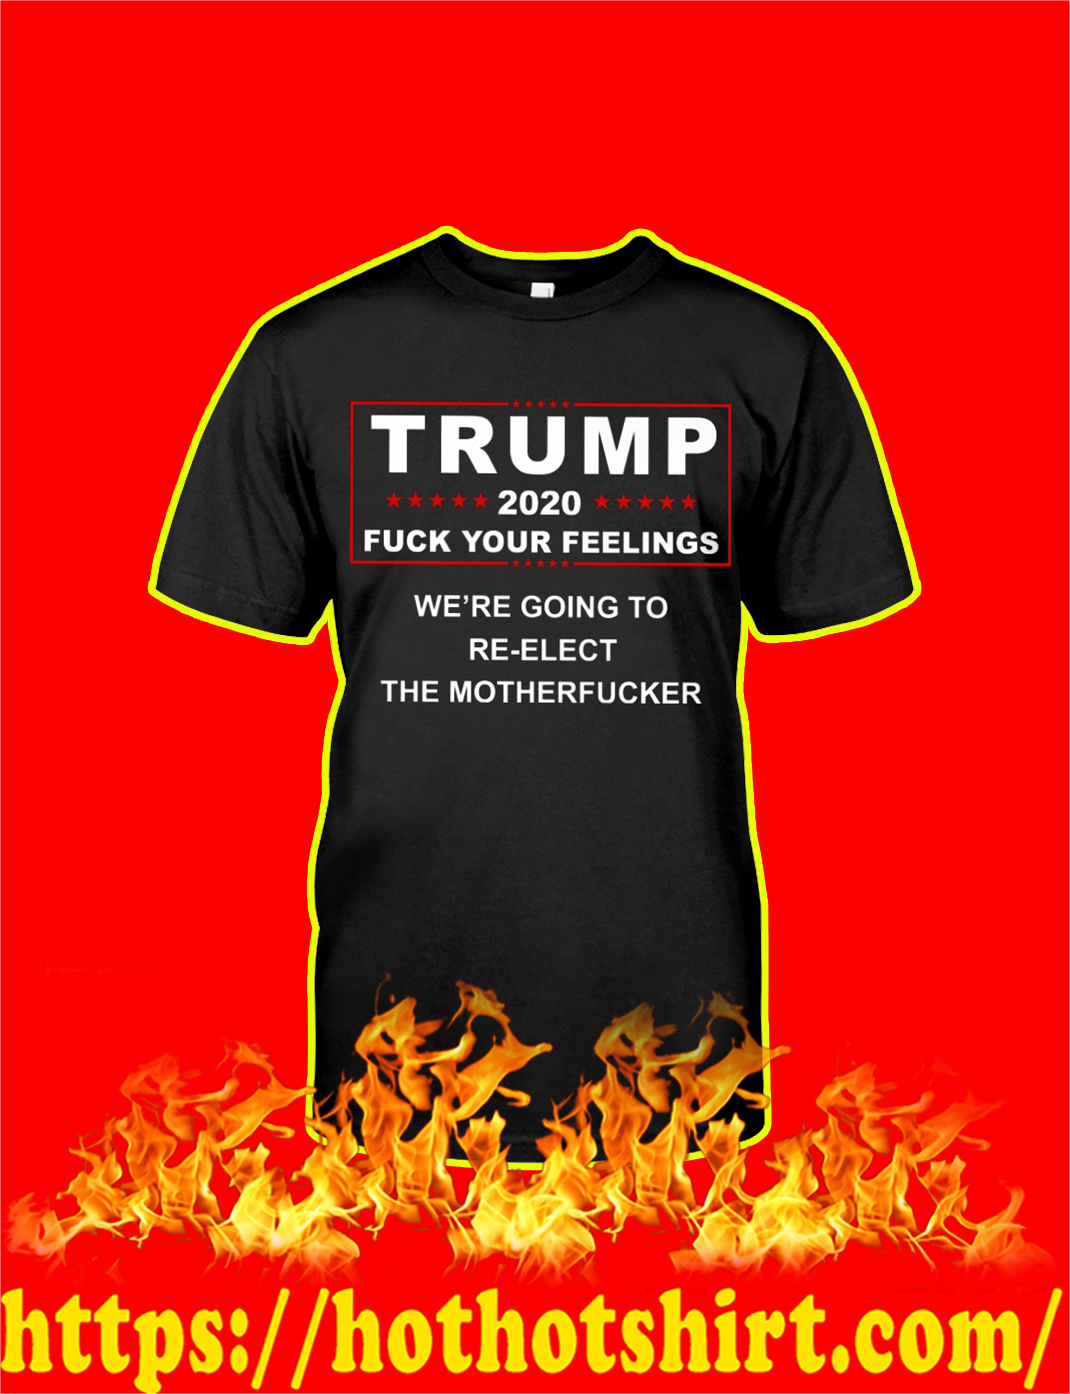 Trump 2020 Fuck Your Feelings shirt, v-neck and hoodie